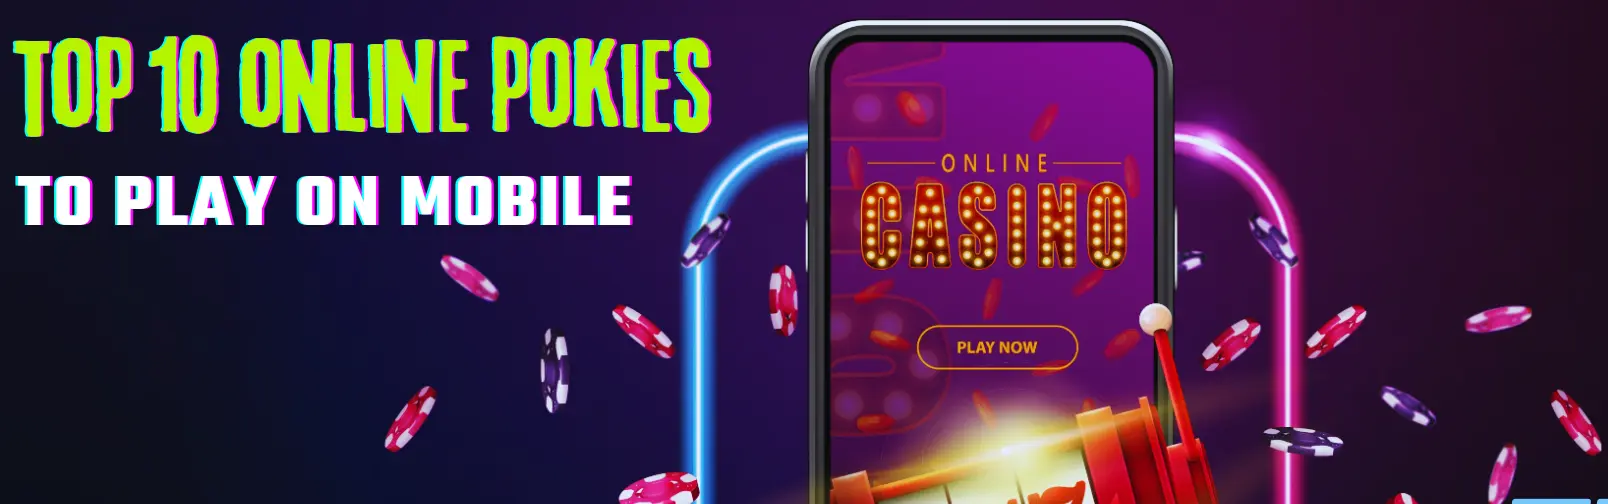 Top-10-online-pokies-to-play-on-mobile